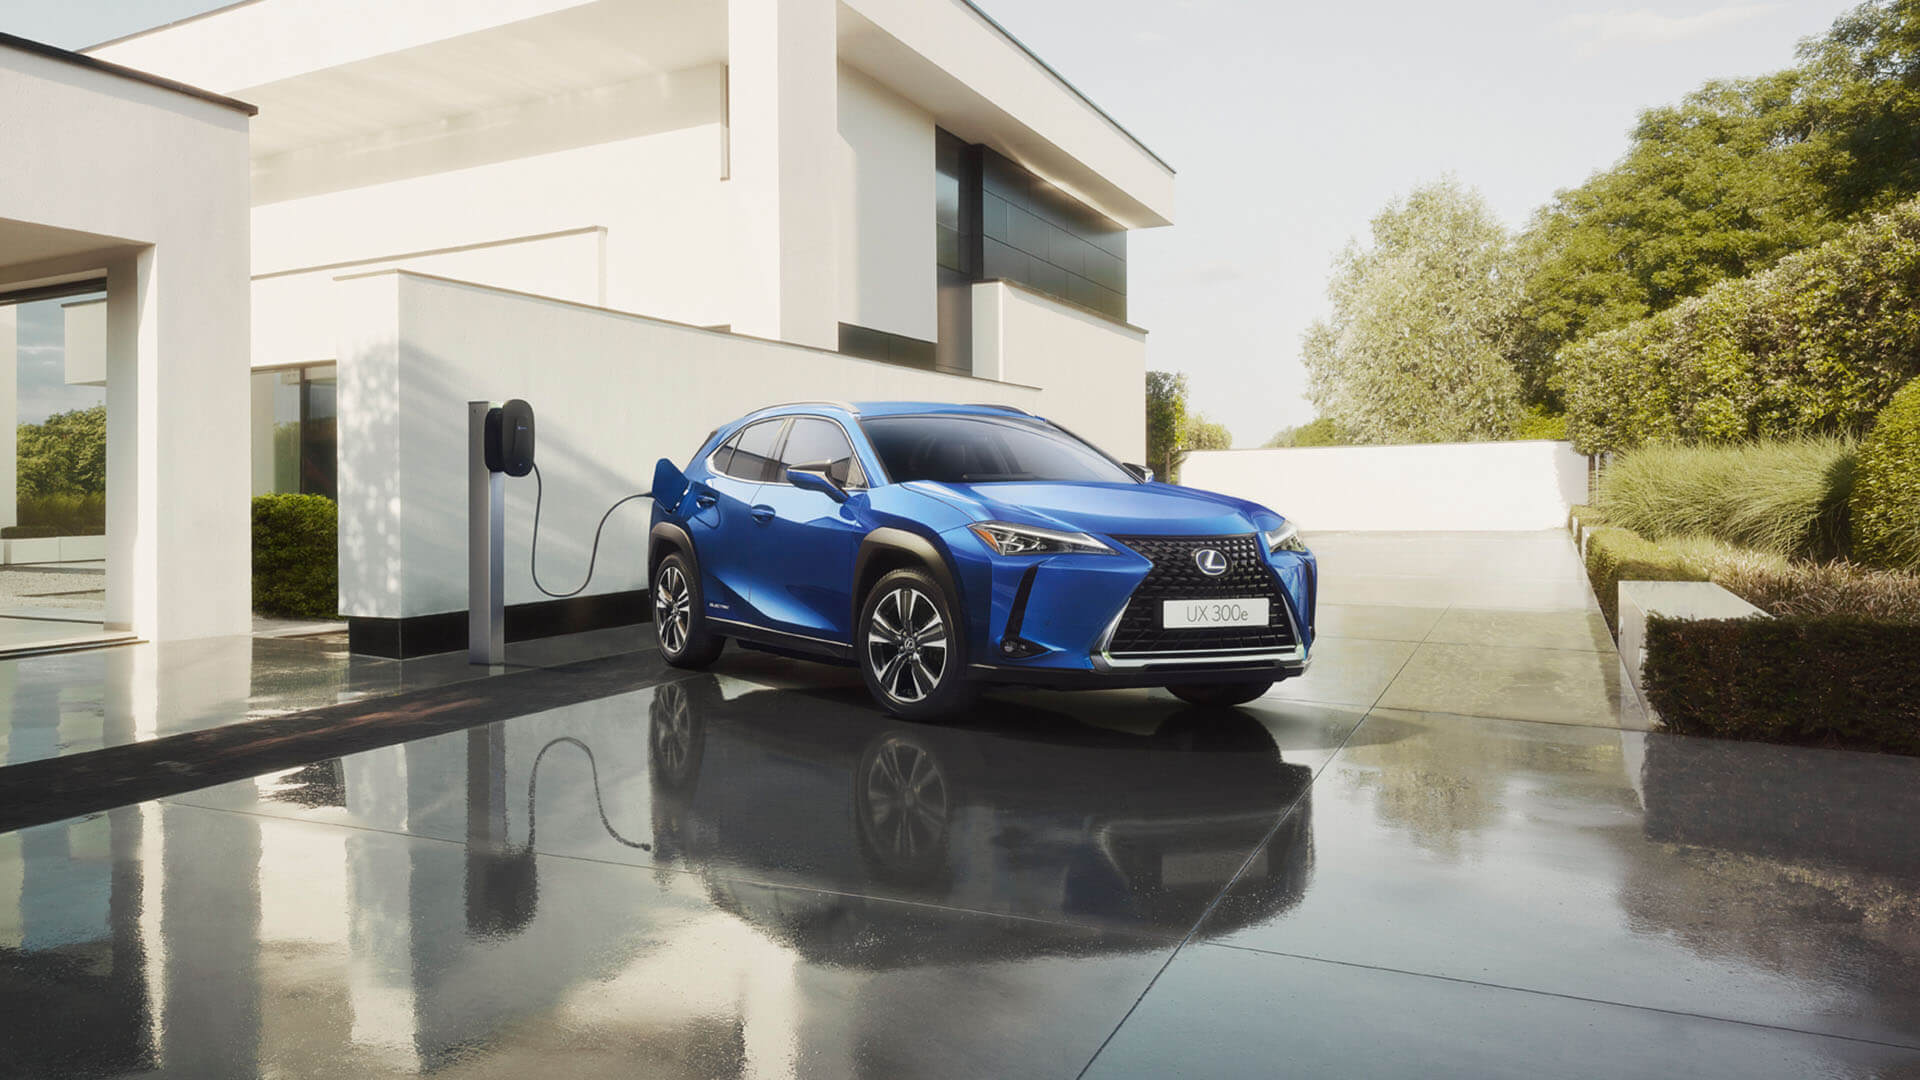 A Lexus UX 300e parked outside a house plugged into a charging station